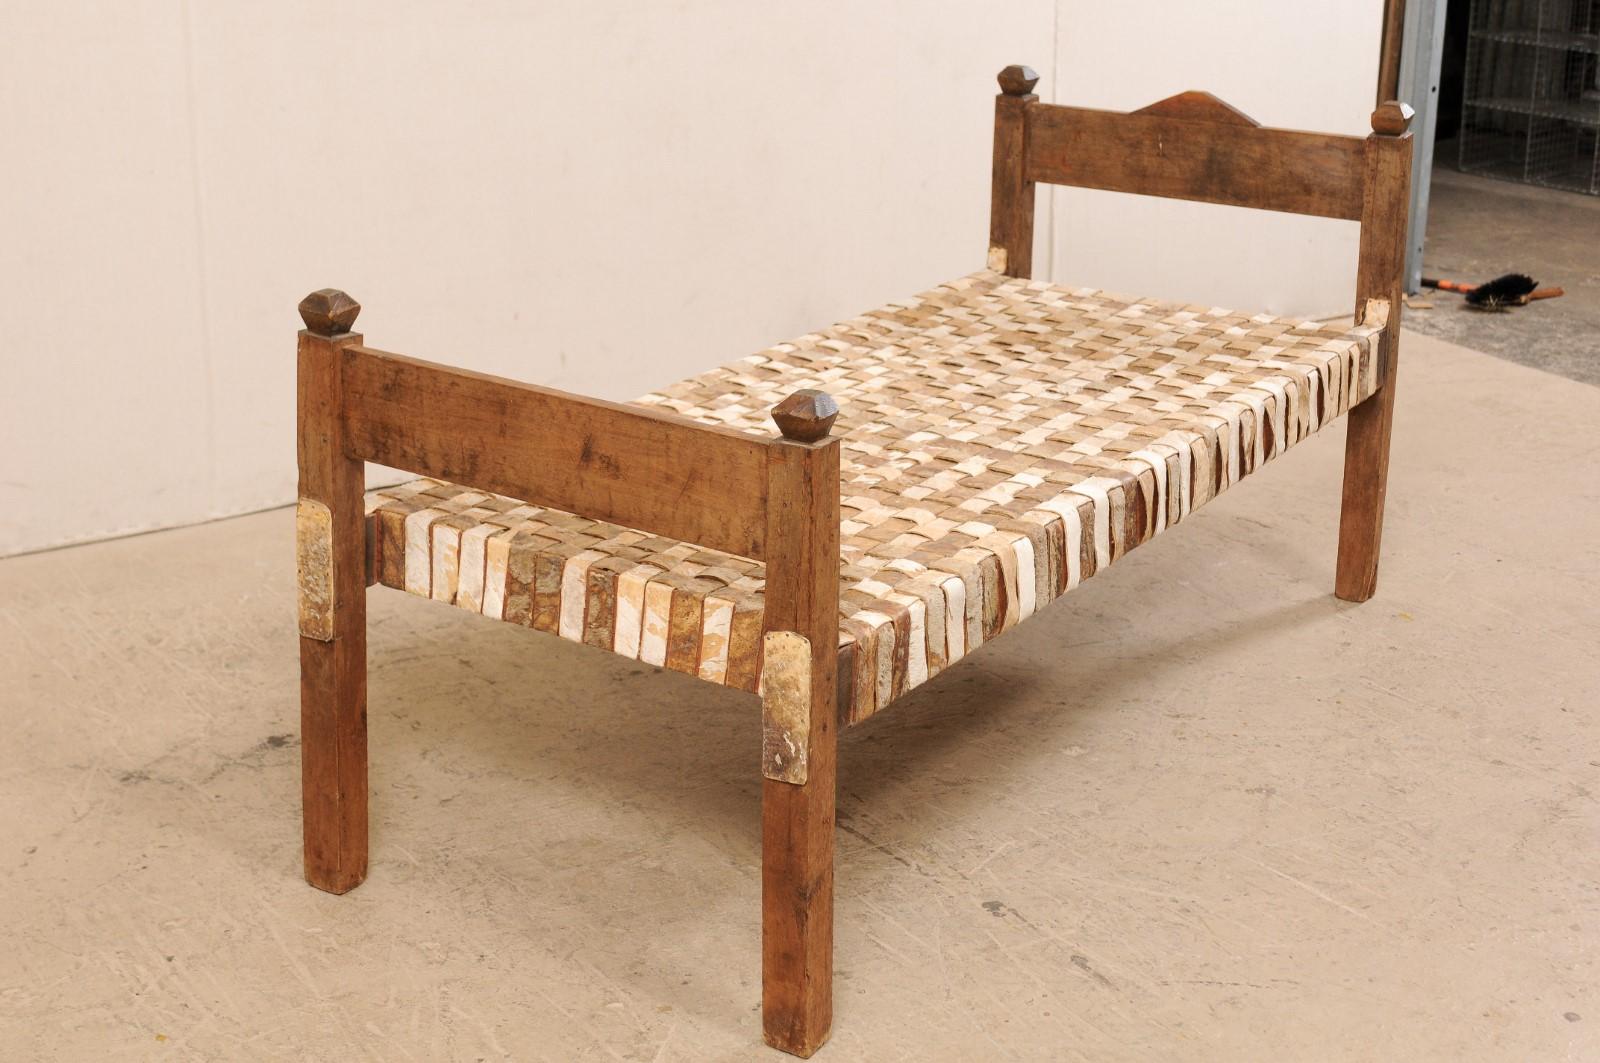 A Brazilian single woven-leather and wood daybed or bench. This Brazilian daybed from the mid-20th century has a great rustic feel with it's bucolic frame and leather strip seat. The wooden headboard is comprised by a single board, styled with a